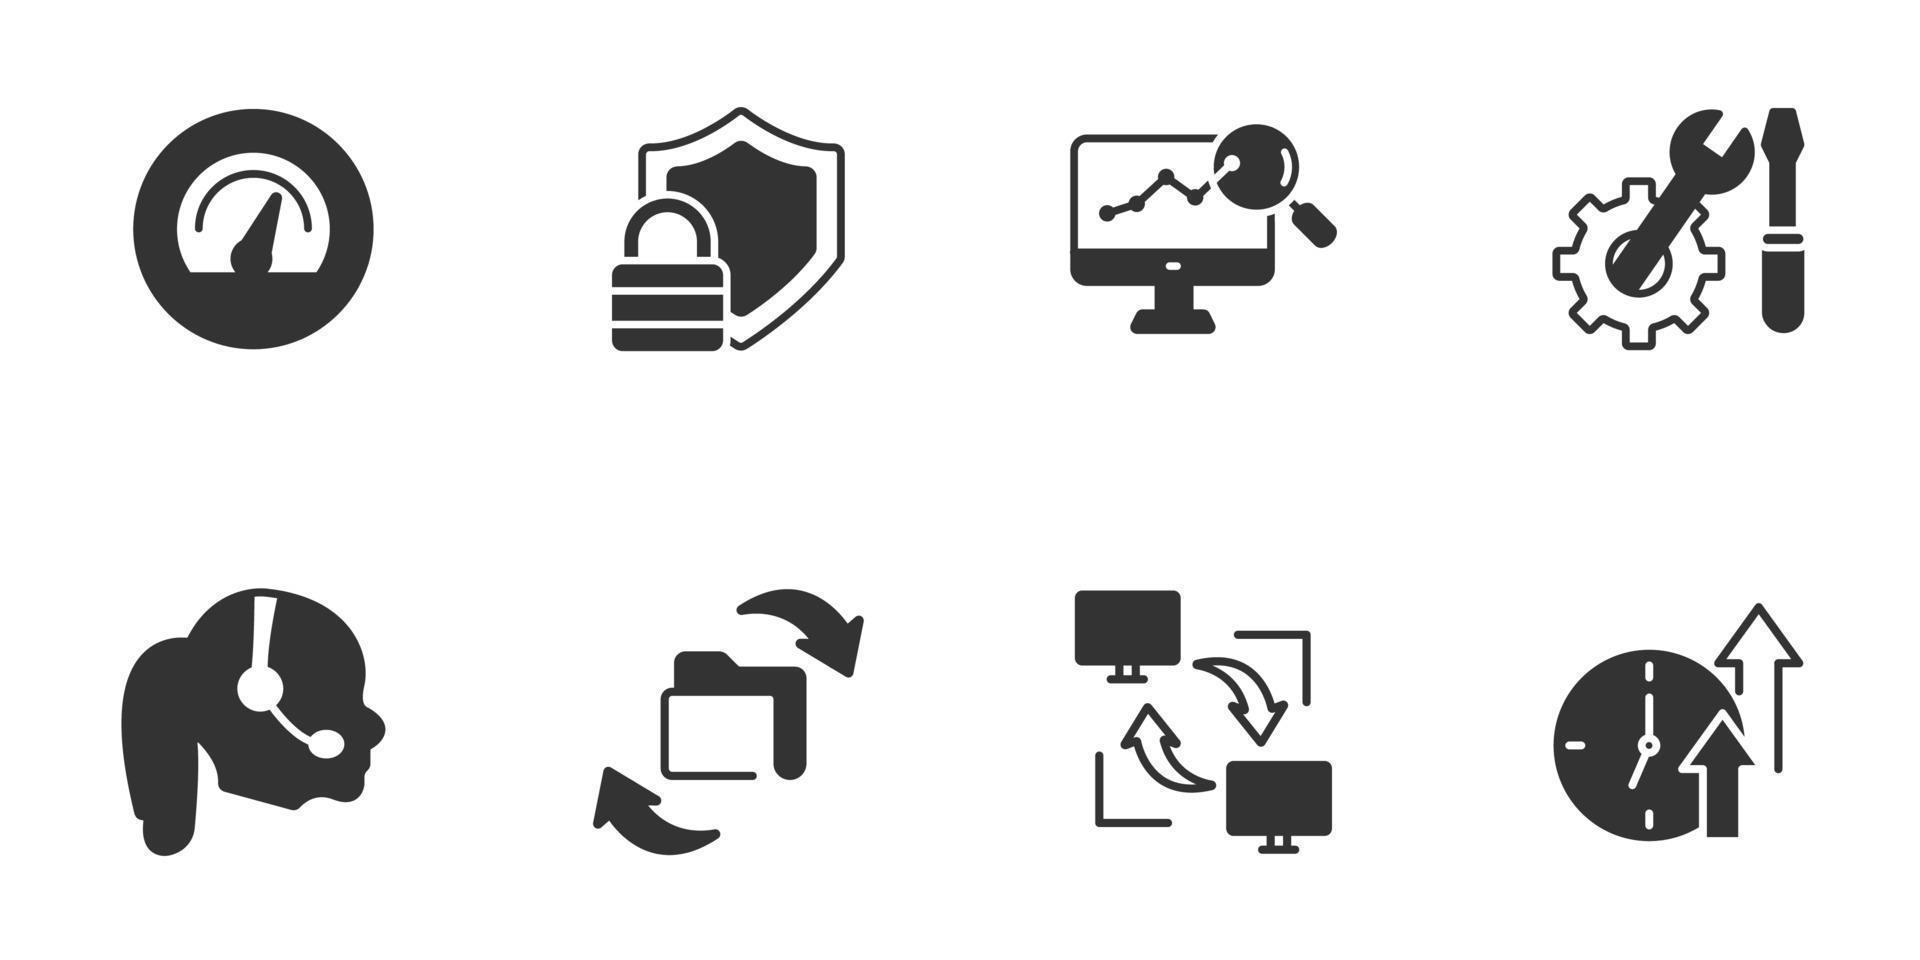 data center and hosting icons set . data center and hosting pack symbol vector elements for infographic web